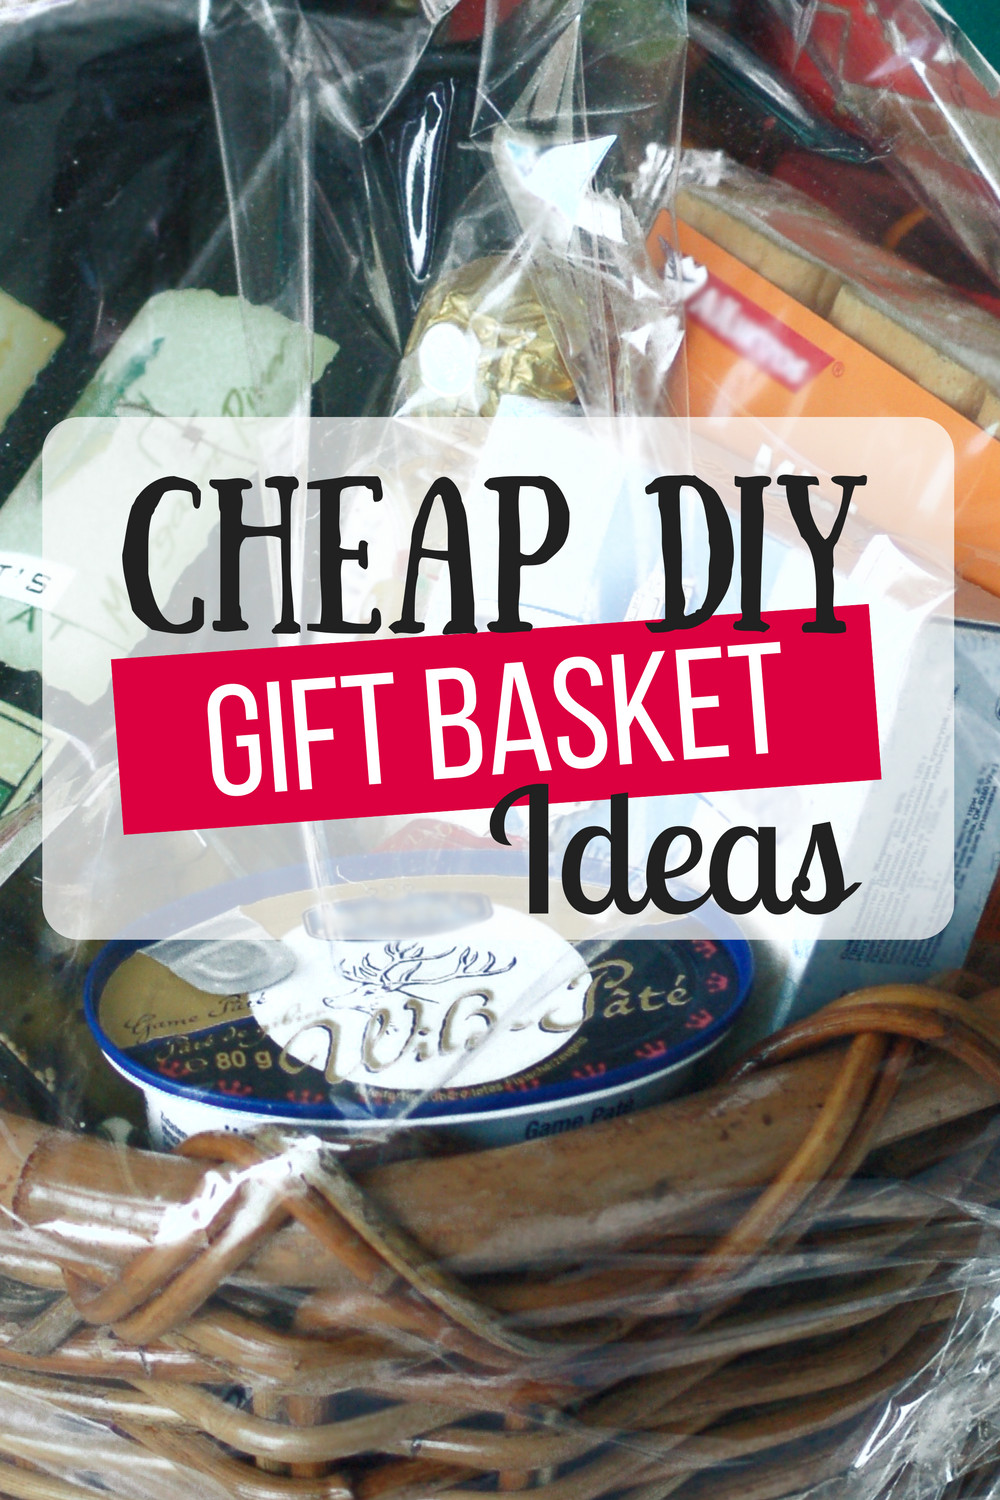 Easy Gift Basket Ideas
 Cheap DIY Gift Baskets The Busy Bud er